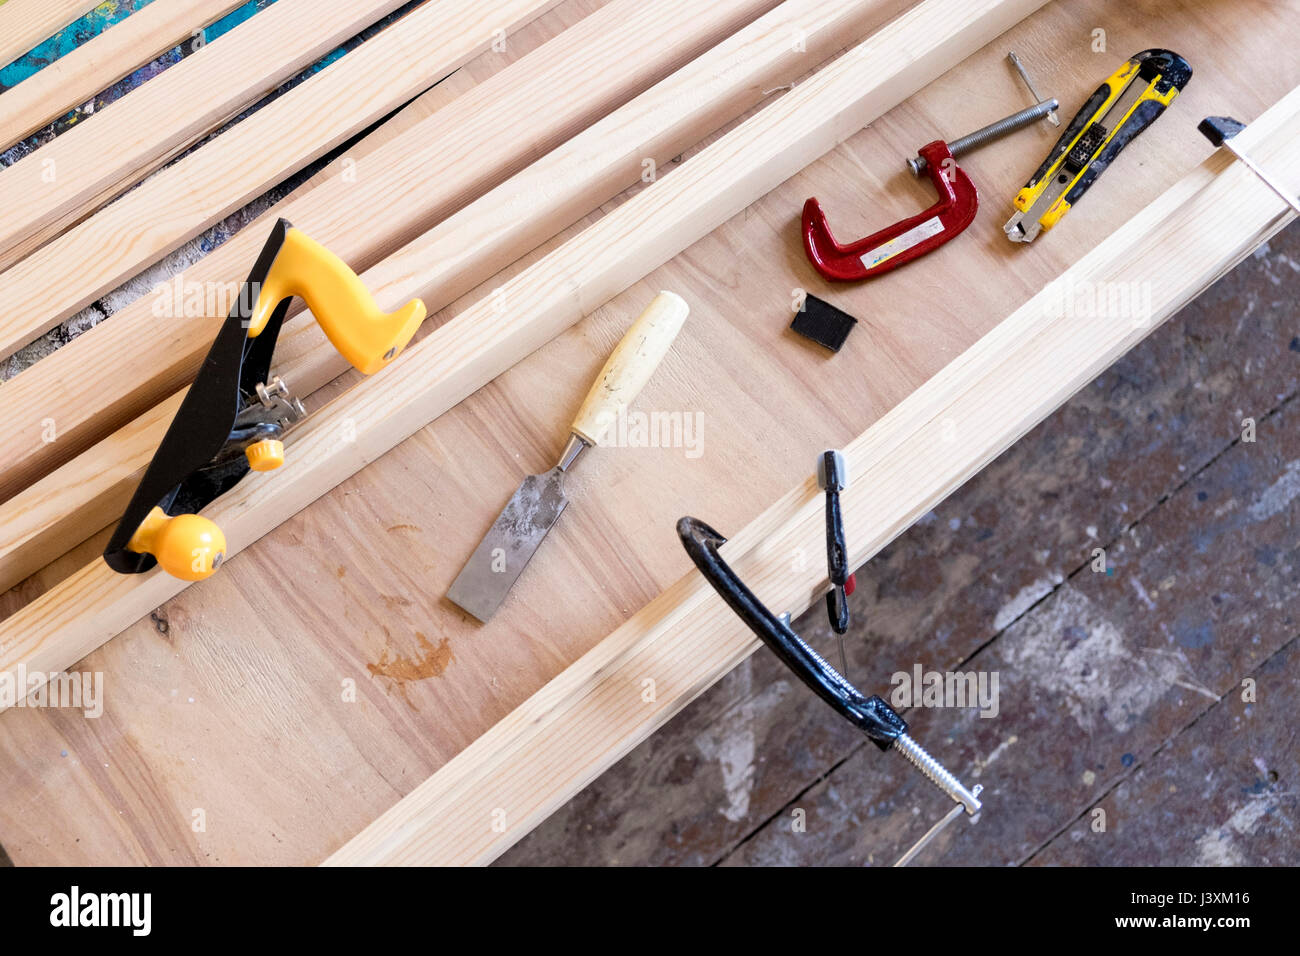 Overhead view of carpentry equipment on wooden workbench Stock Photo